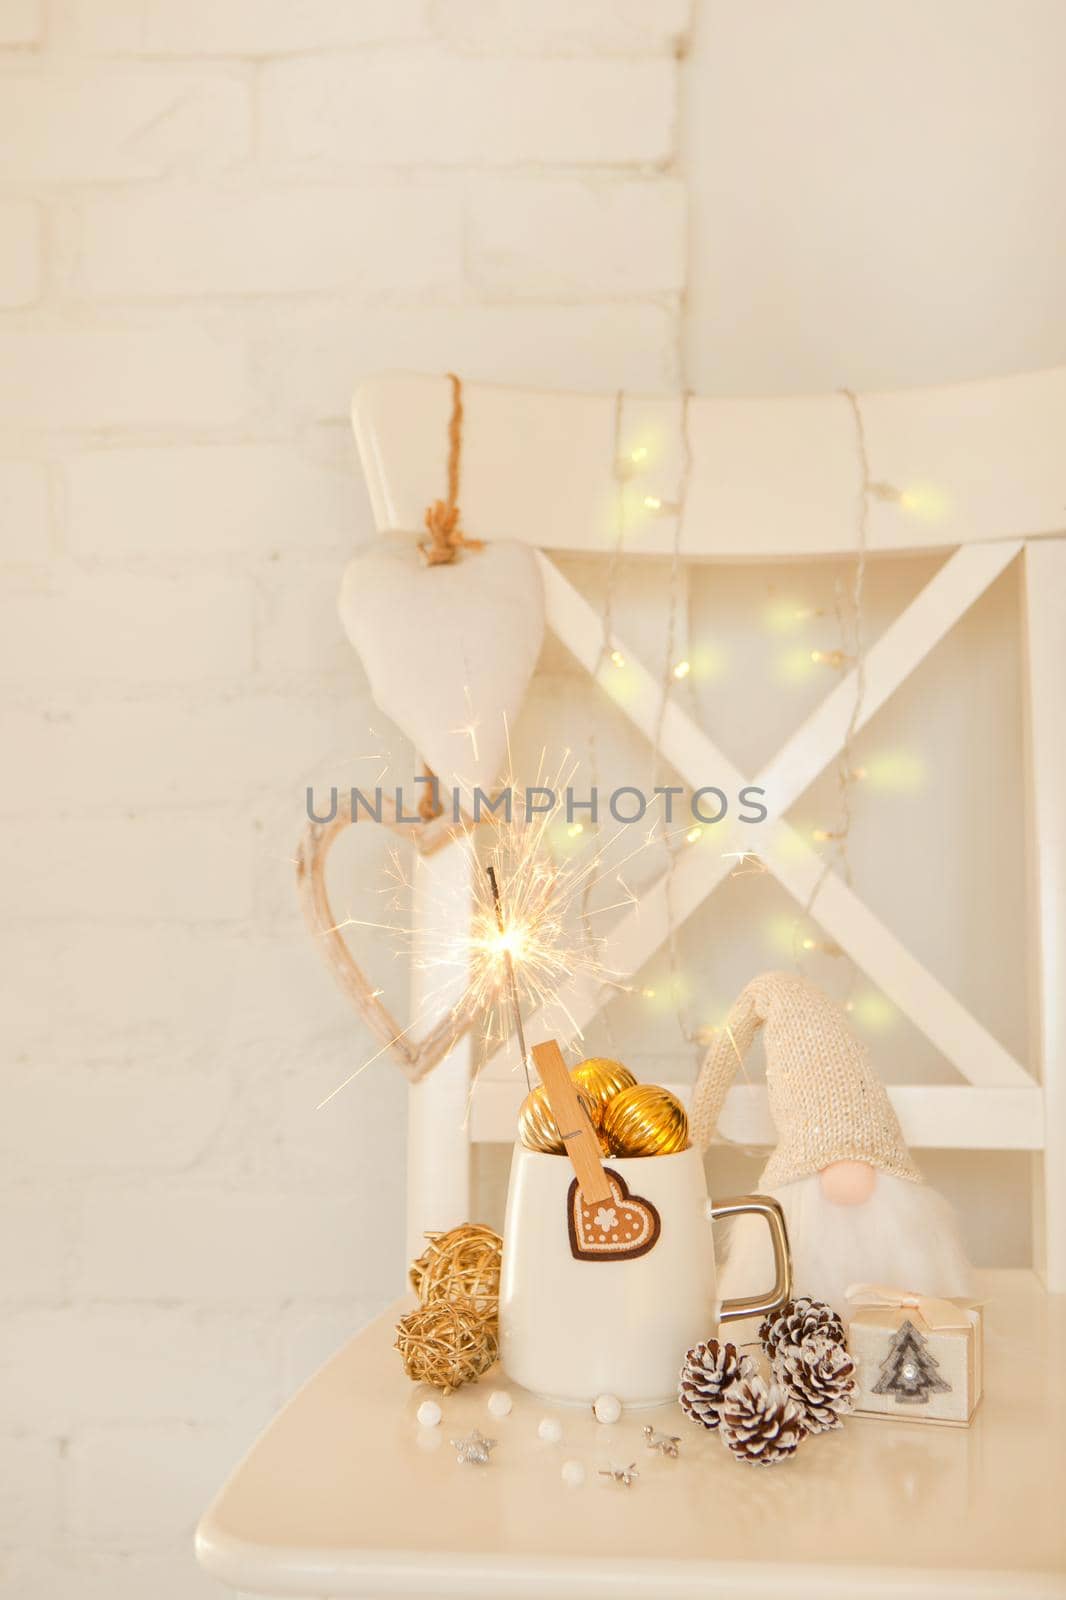 White cup with golden balls and sparklers. Cute gnome with long beard. white cristmas hearts, pine cones and warm lights on brick wall